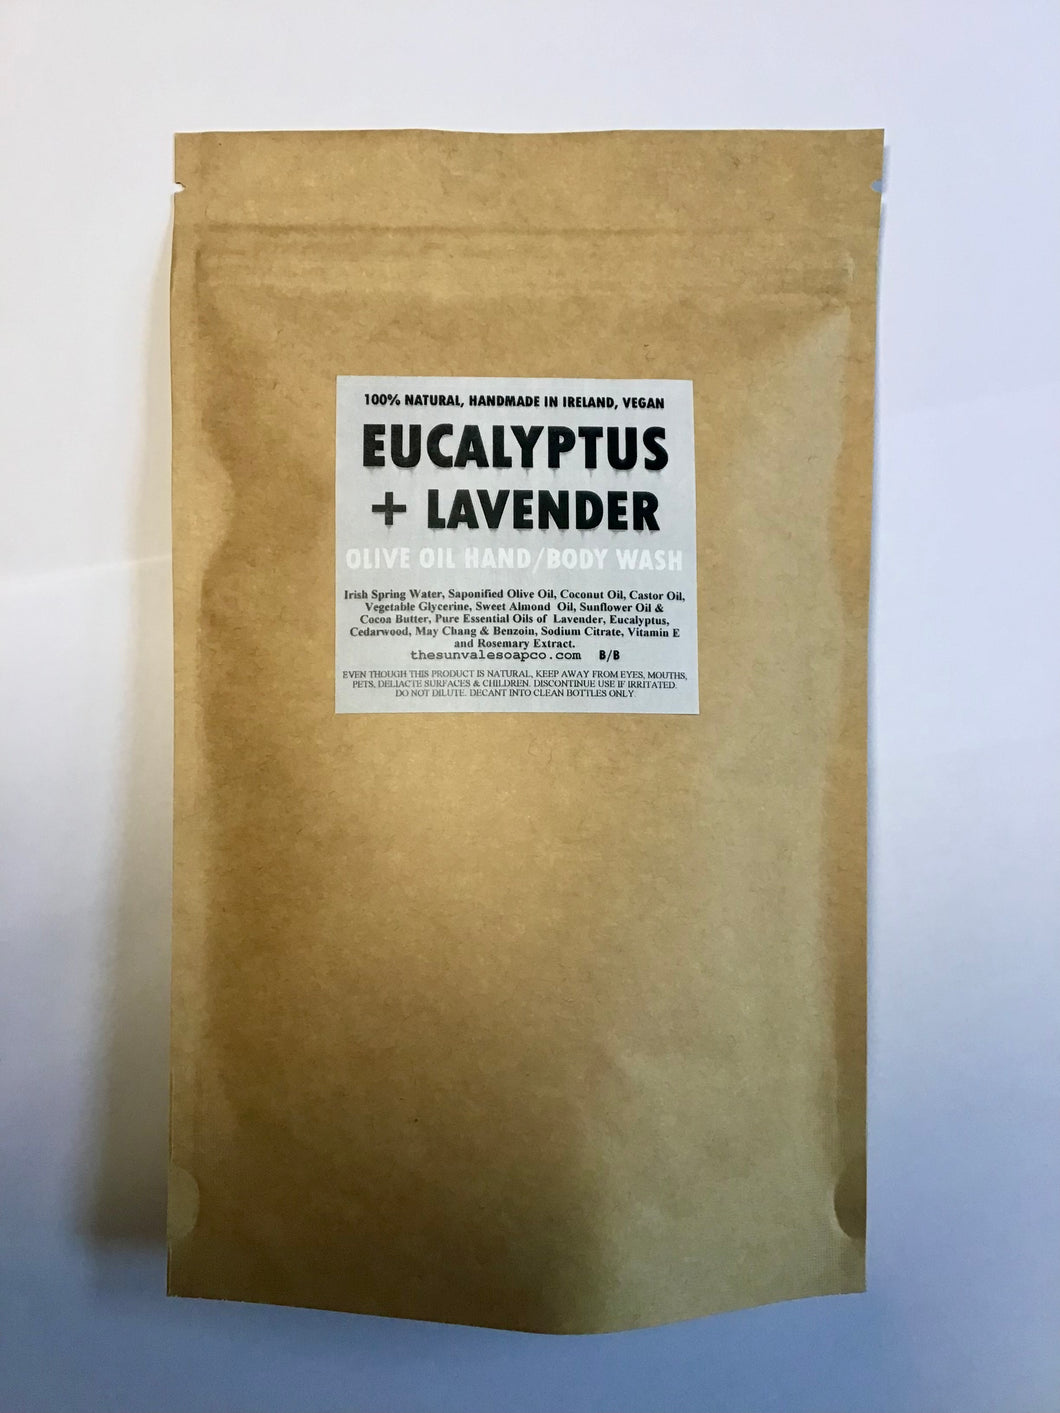 Eucalyptus and Lavender Olive Oil Hand and Body Wash Refill Pouch